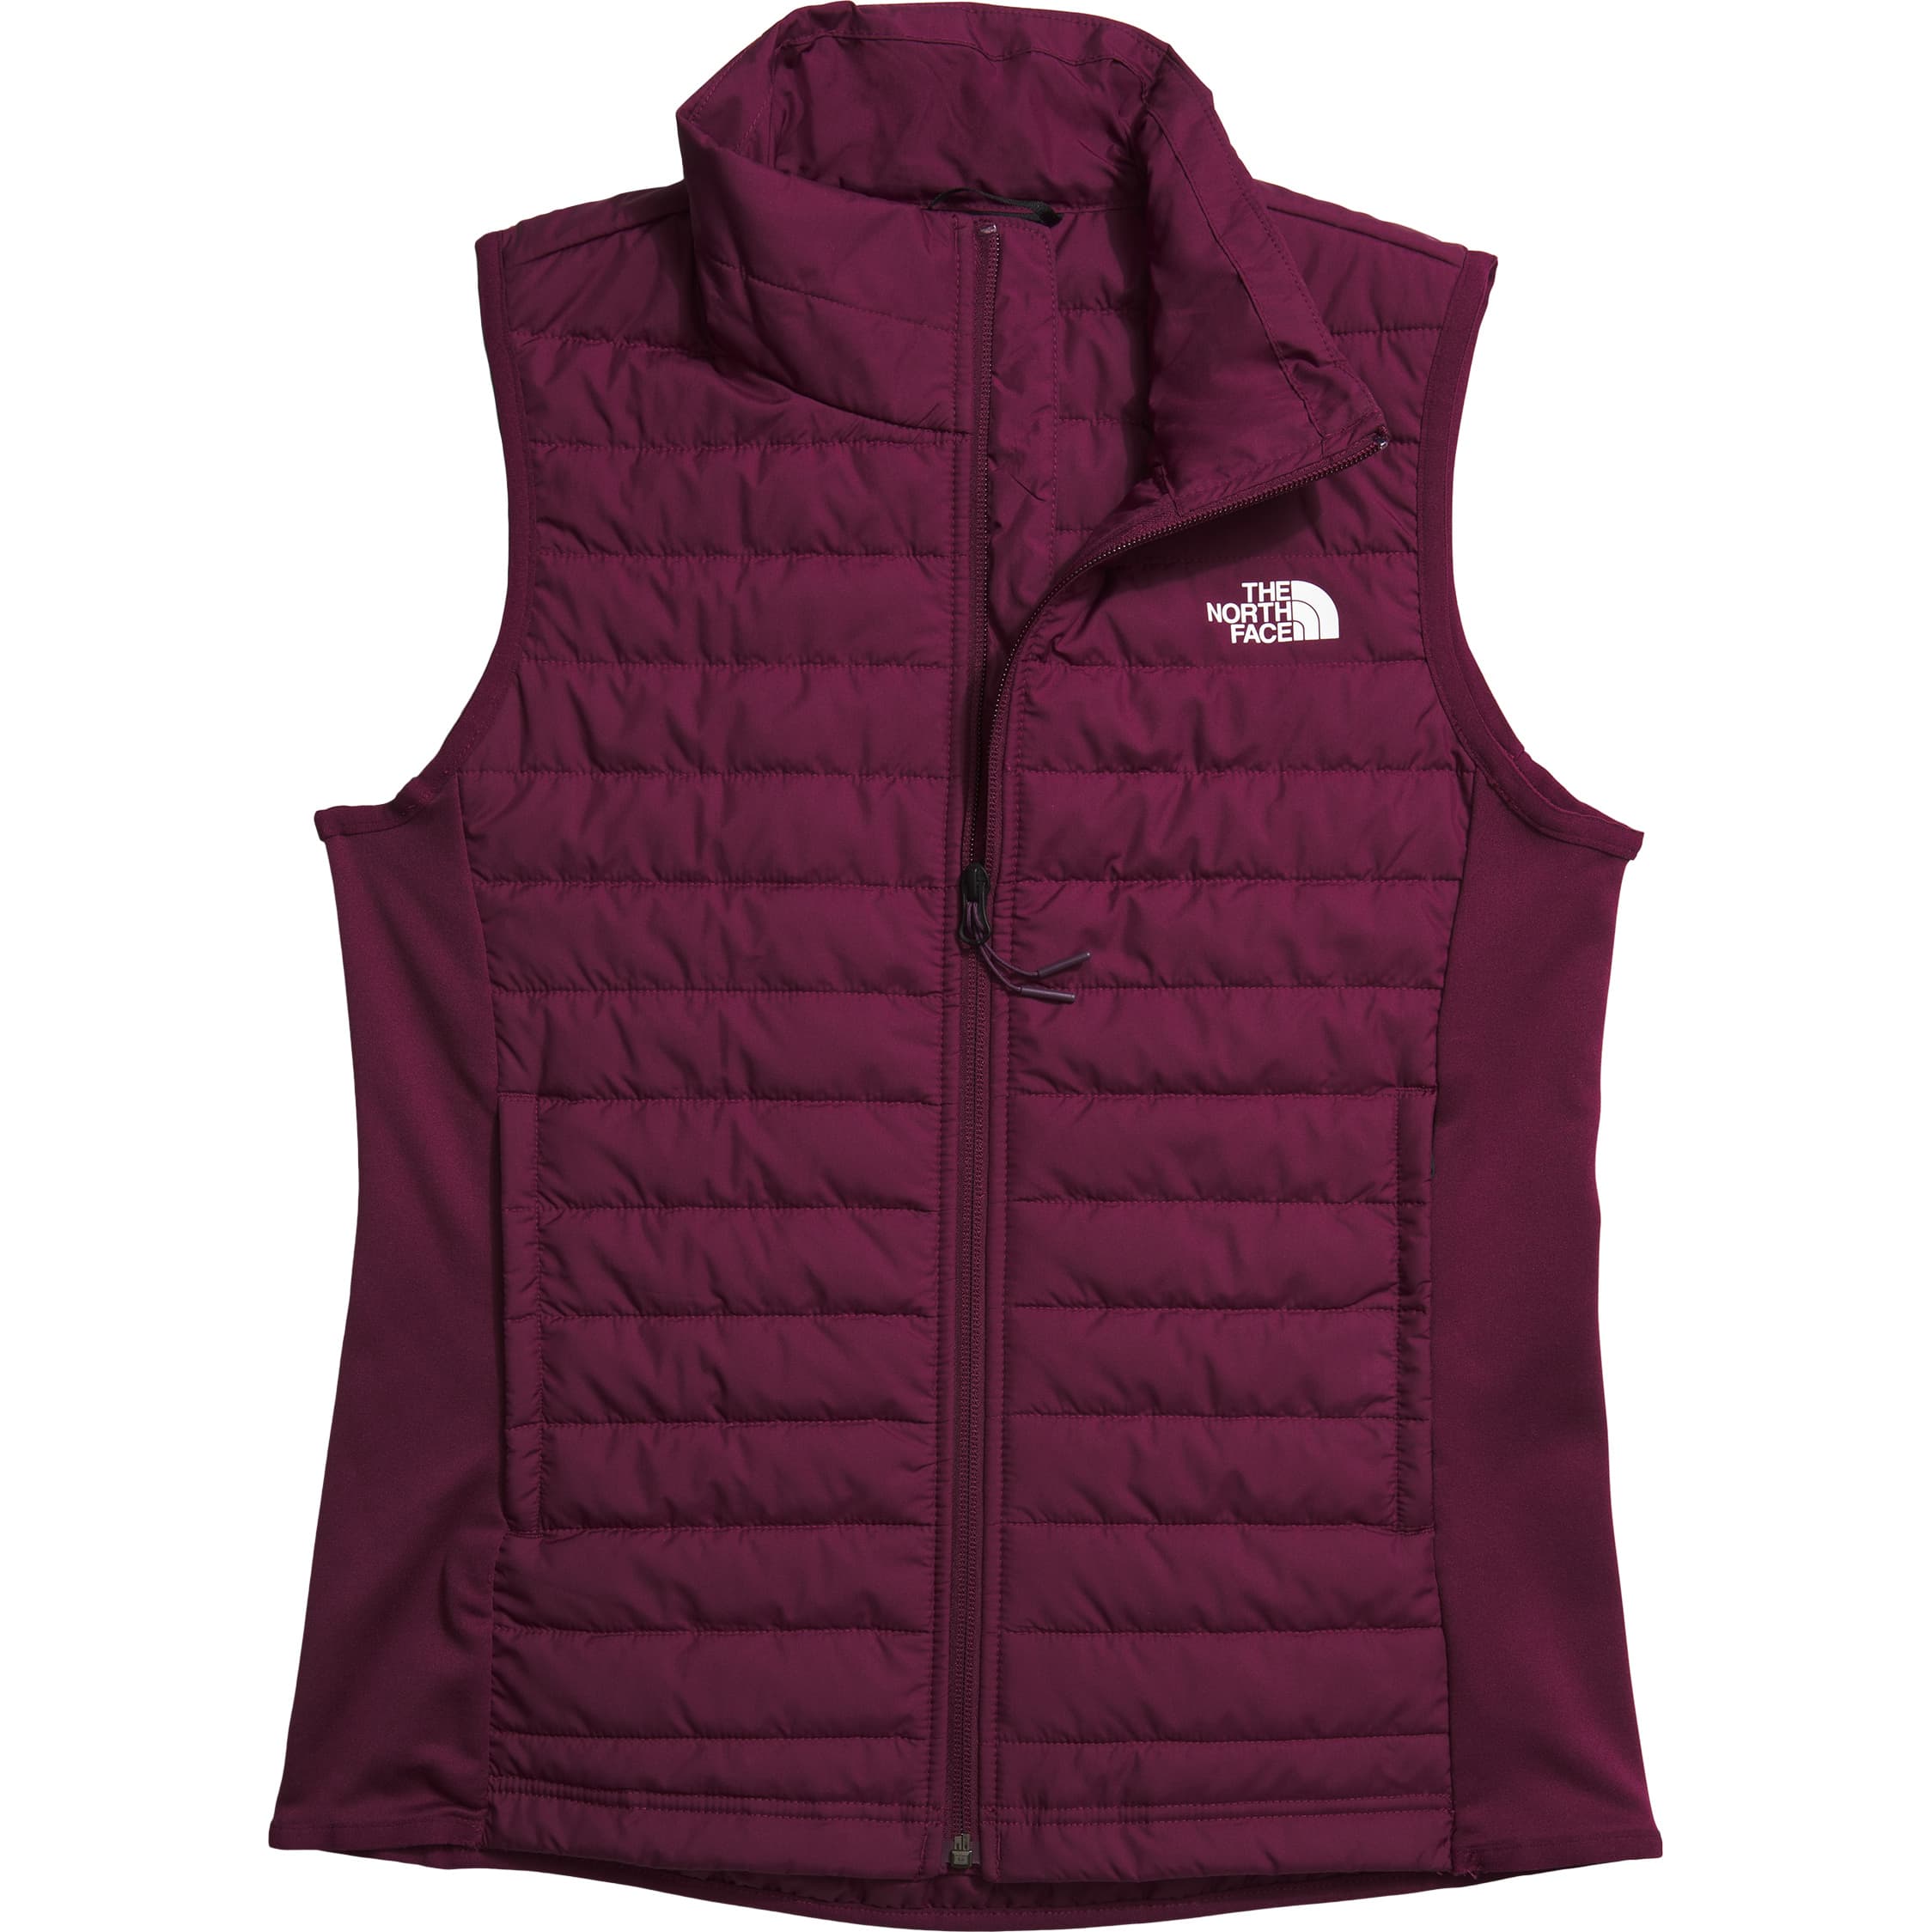 The North Face® Women’s Canyonlands Hybrid Vest